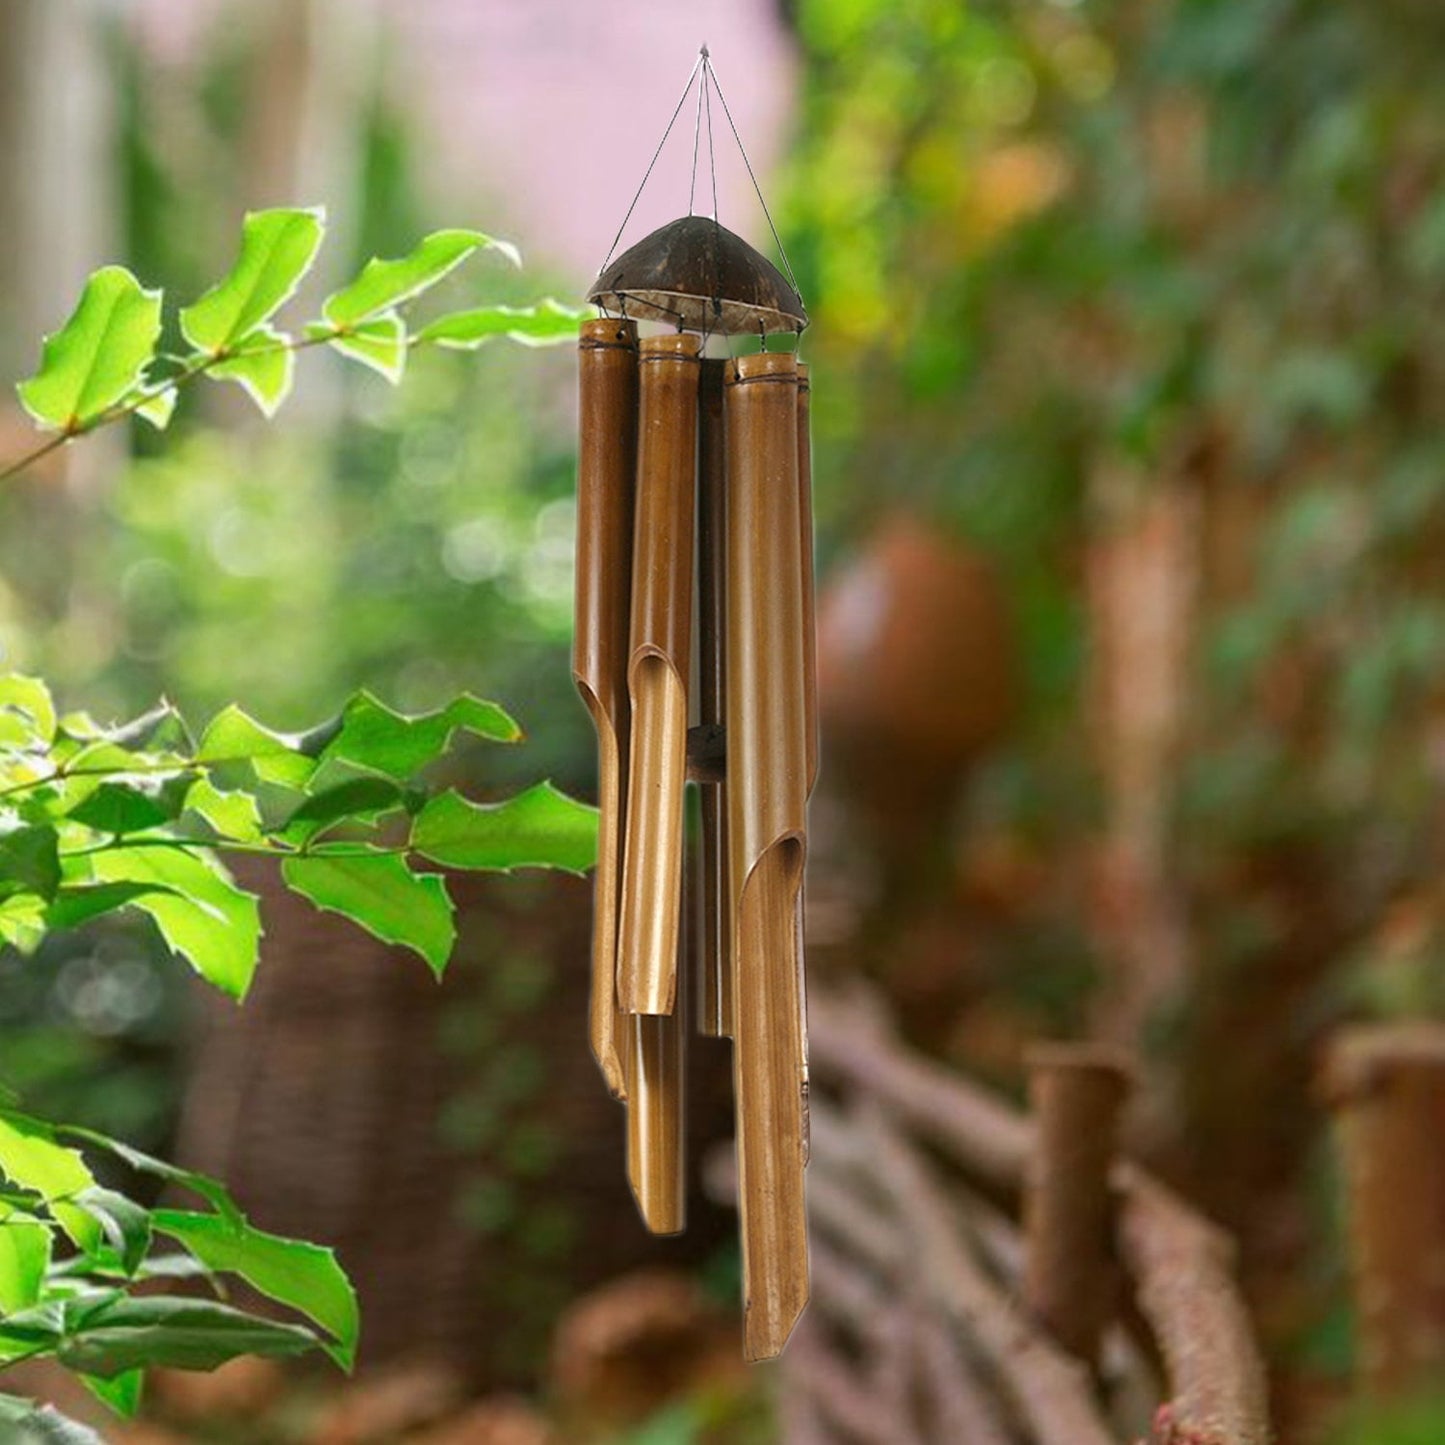 Bamboo wind chime bamboo bamboo rustic Feng shui chime made of bamboo decoration for outdoors made of wood handmade